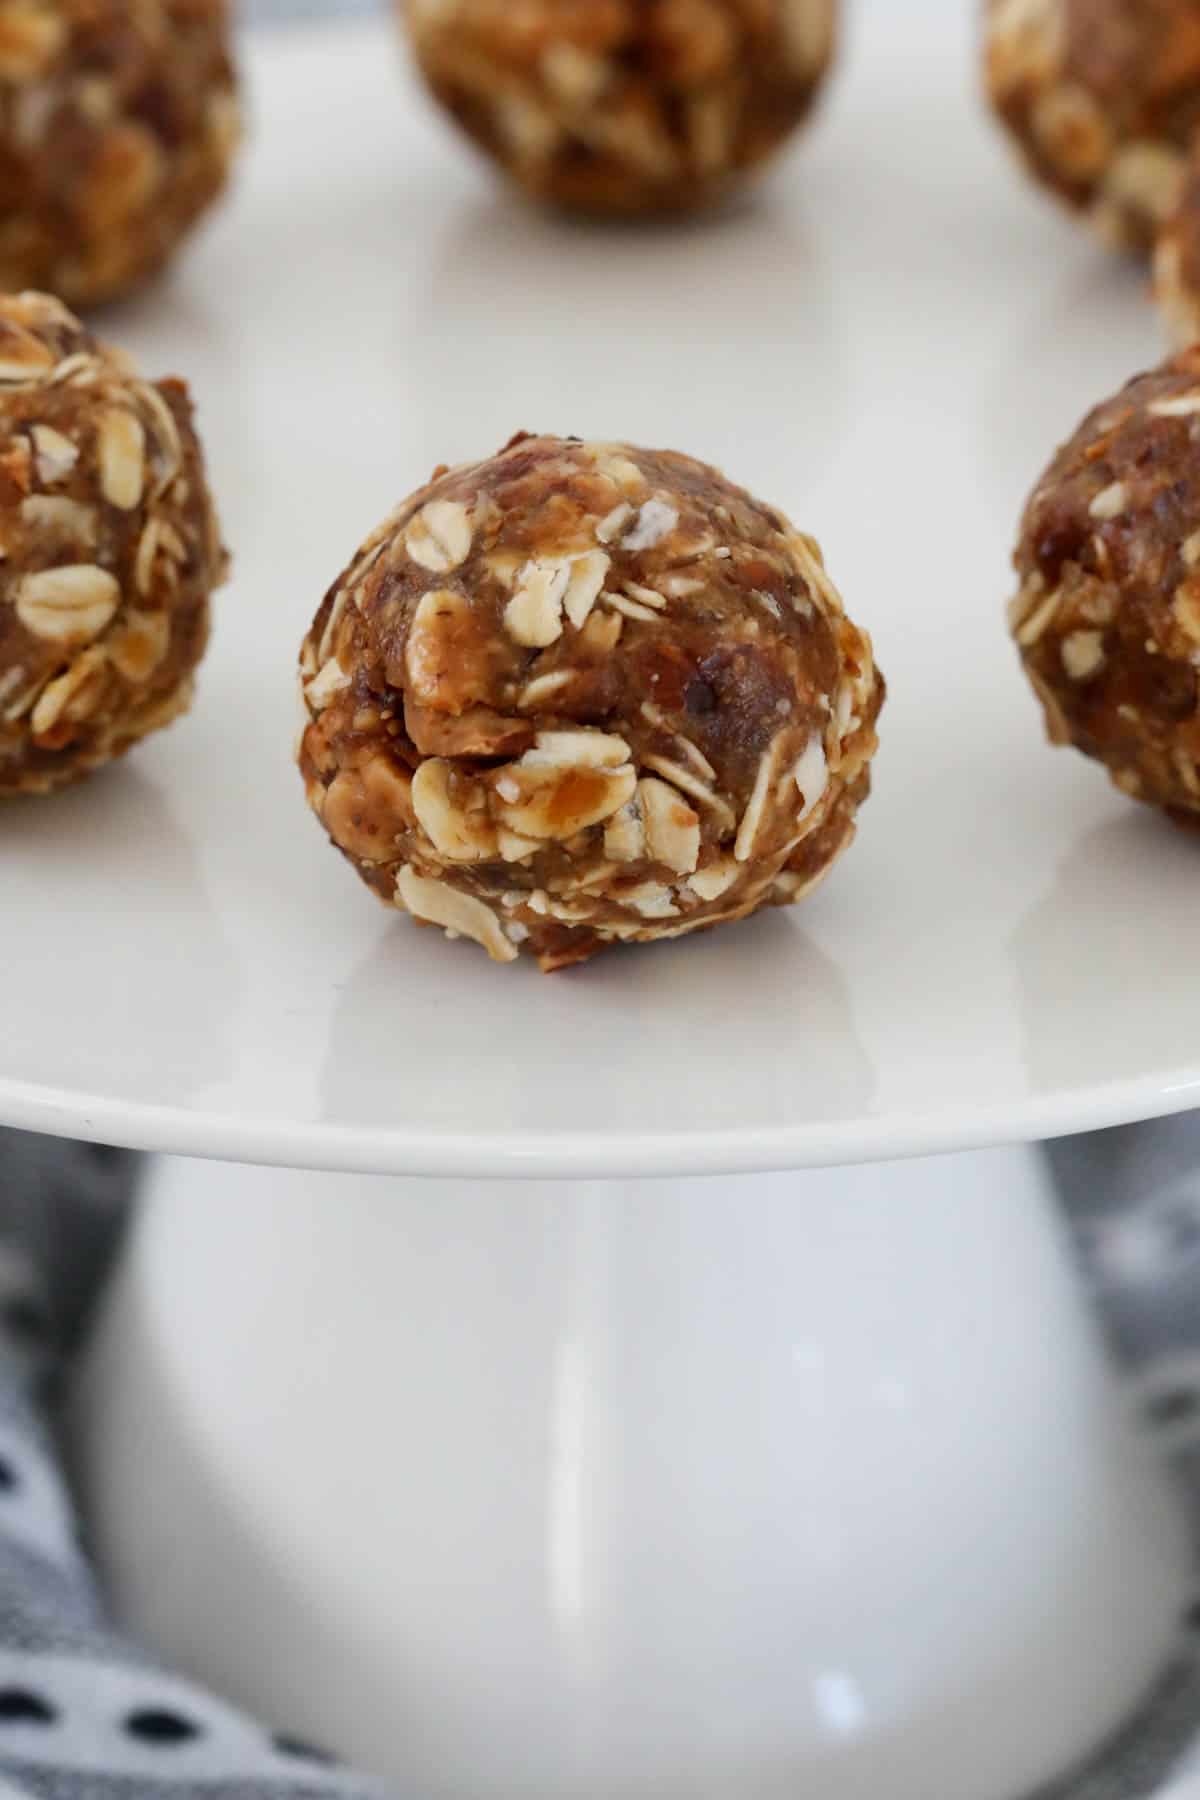 A healthy almond, oat & date ball on a cake stand.